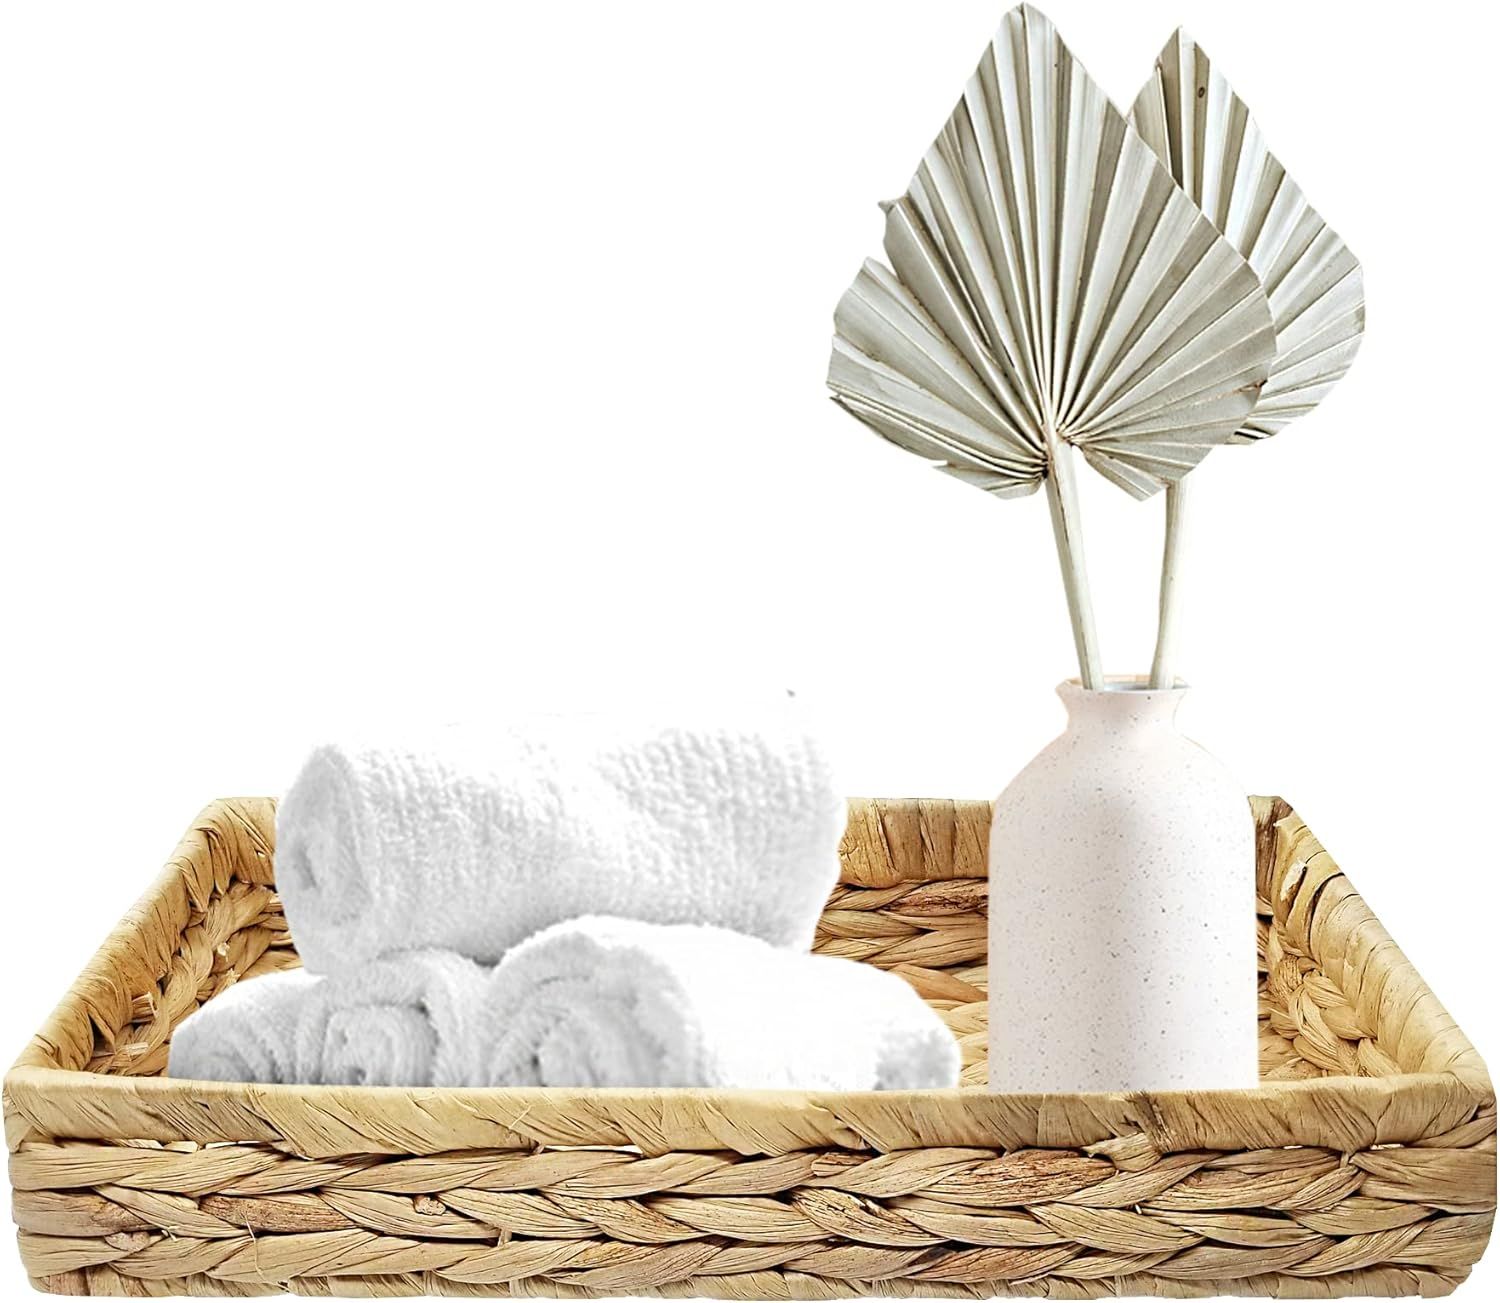 TAGREE Rustic Woven Seagrass Guest Towel Tray Holder for spa, Farmhouse Water Hyacinth Guest Towel N | Amazon (US)